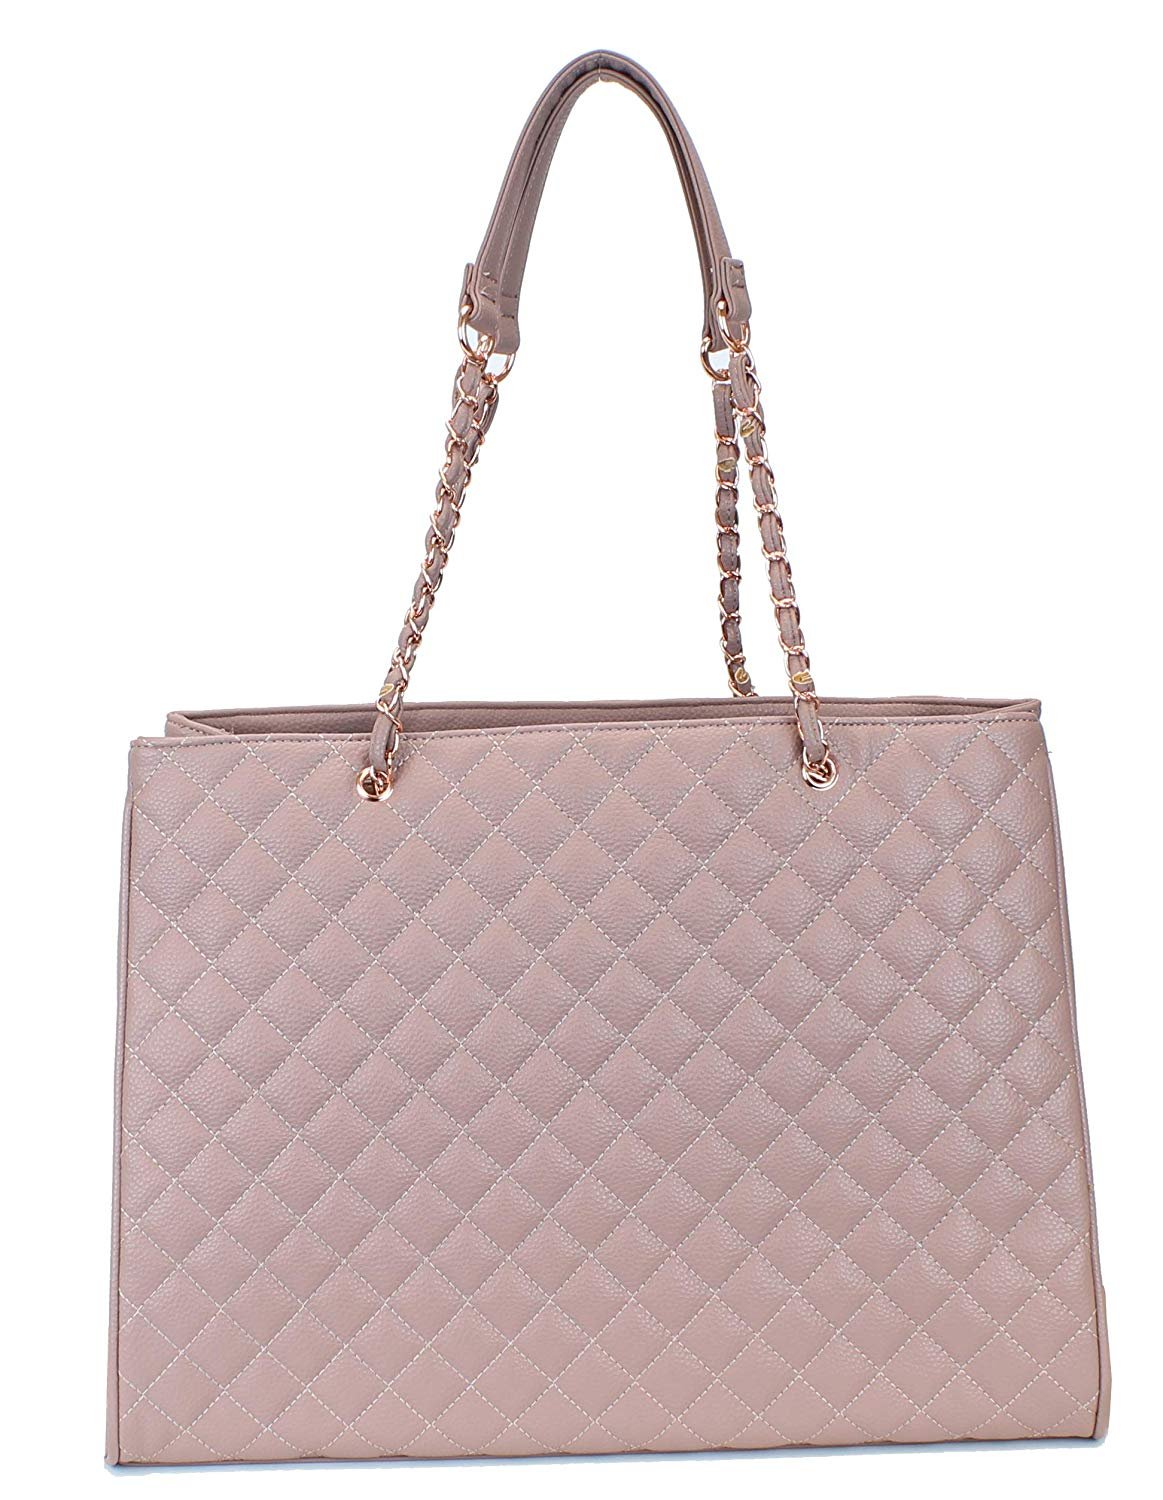 Buy Executive Laptop Bag for women in India (Nude Pink) | Tan & Loom